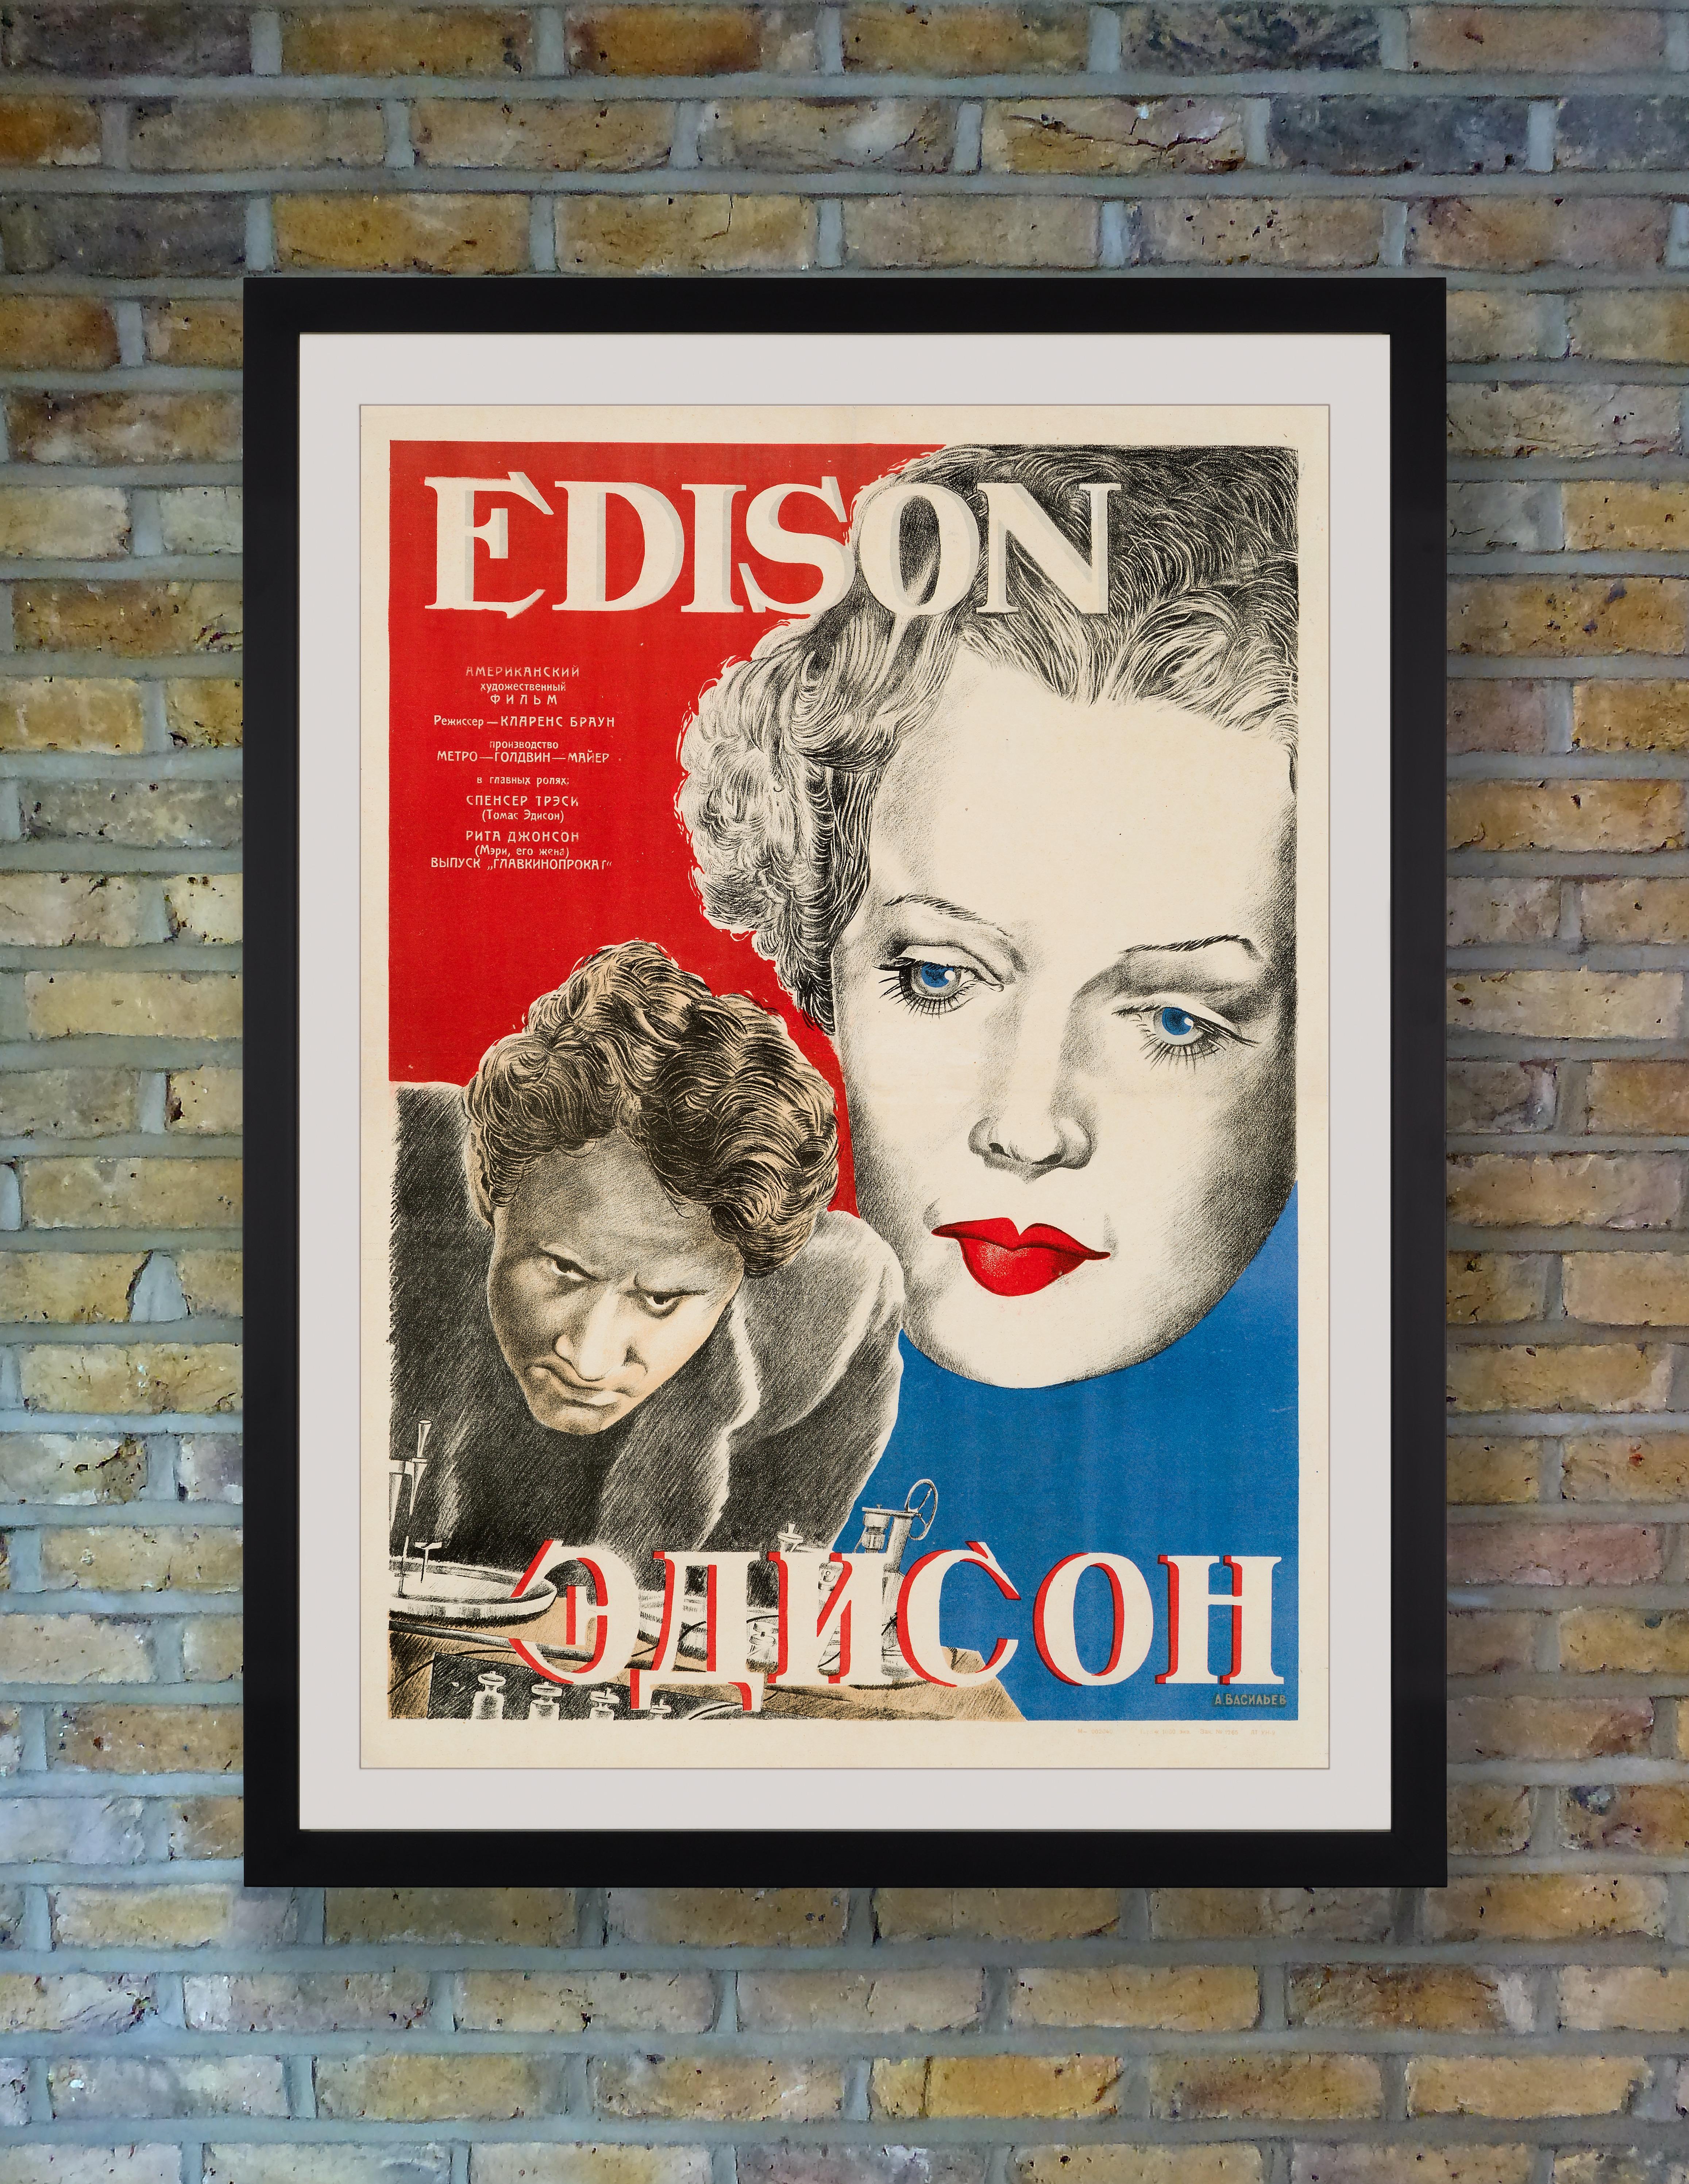 An exceptionally rare and beautiful stone lithograph poster by A. Vasileev for the first Russian release of 'Edison, the Man' in 1944. The film was the second of a pair of complementary biopics released by MGM in 1940, spanning the life of legendary